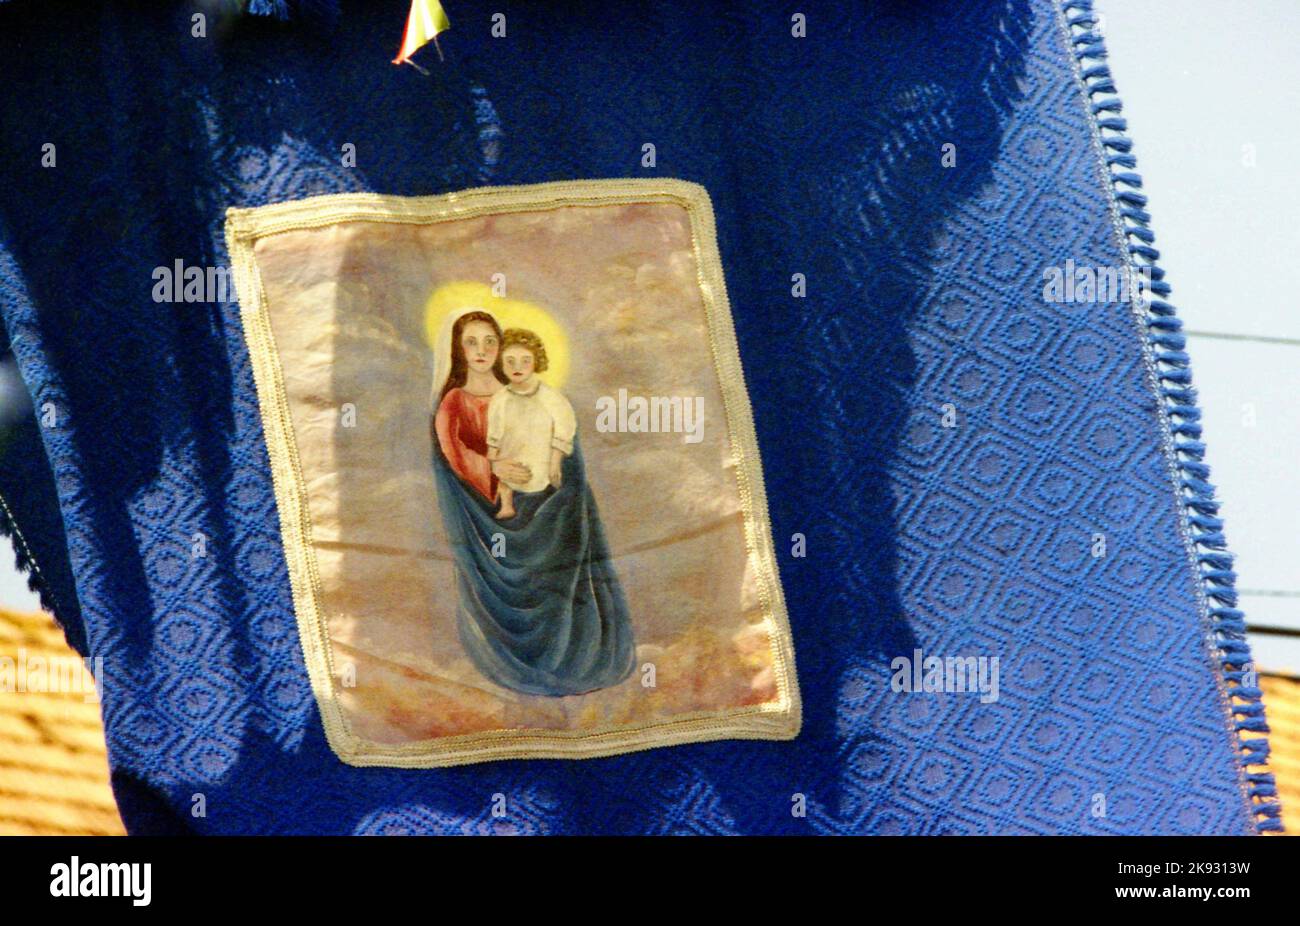 Harghita County, Romania, approx. 2002.  Christian Catholic pilgrimage to the Franciscan monastery in Șumuleu Ciuc, a famous annual event during the Pentecost. Close-up on the design of a religious flag. Stock Photo